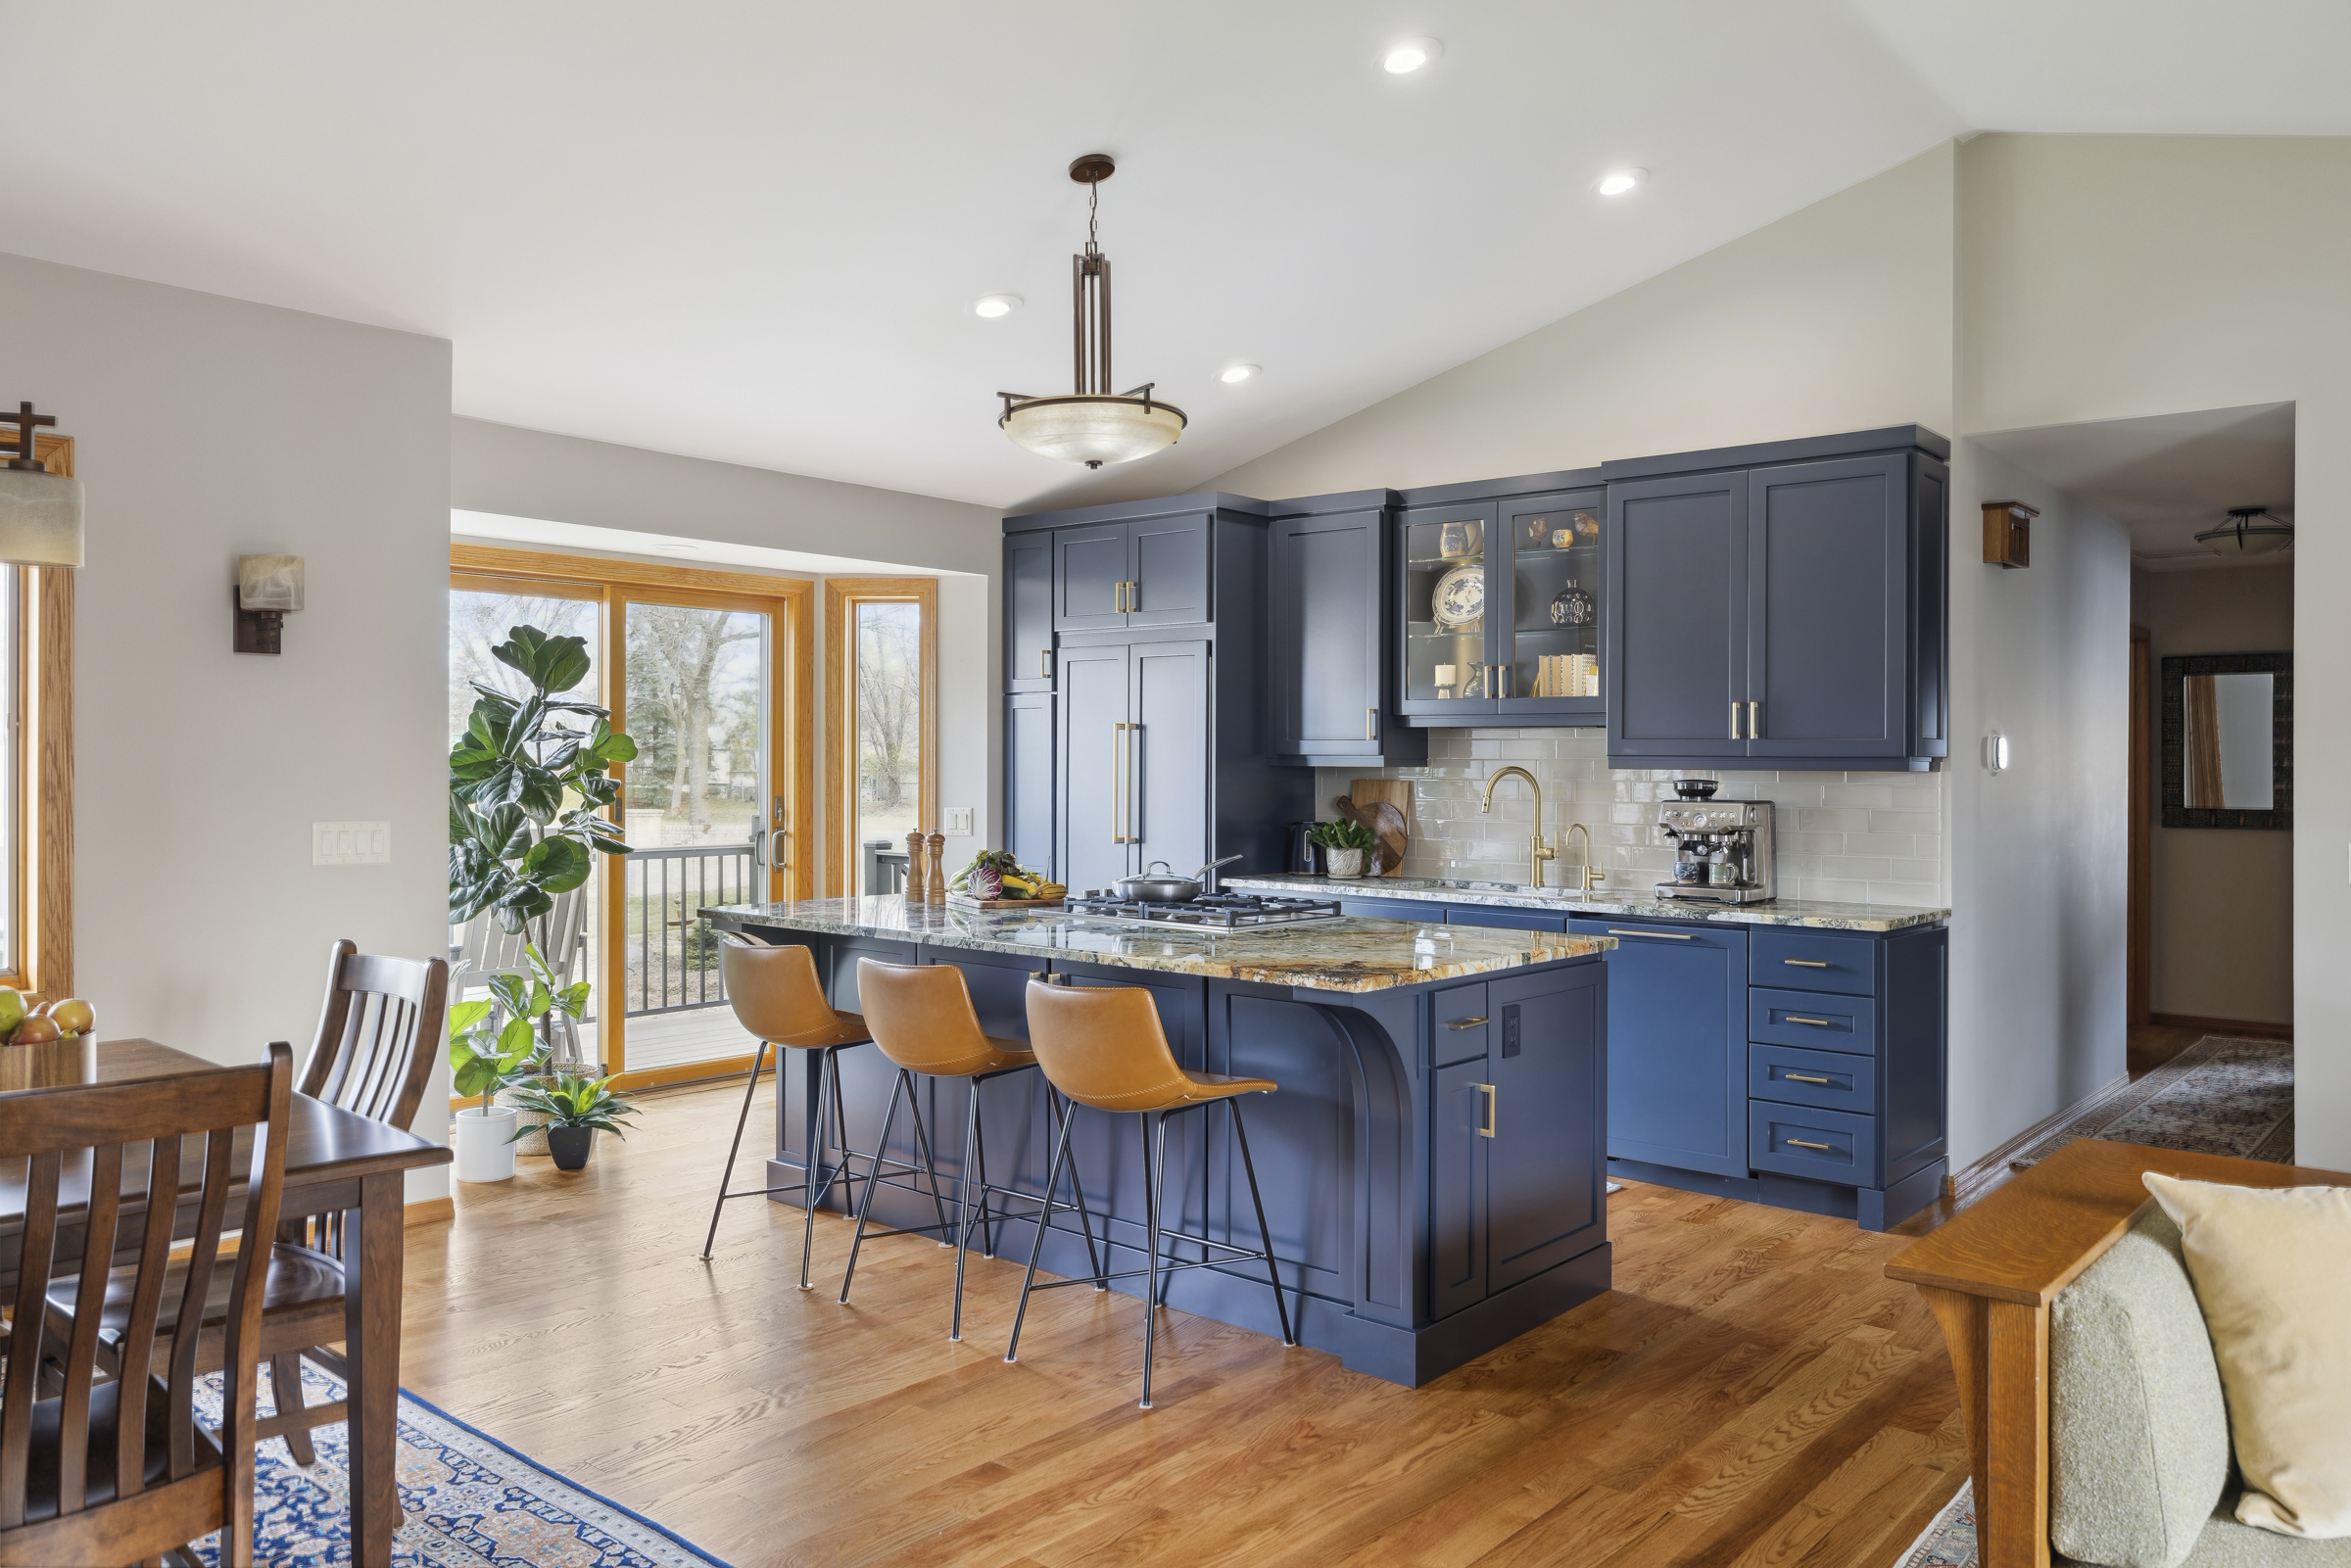 Open kitchen remodel with blue island and cabinets, wood floor, and tall vaulted ceilings